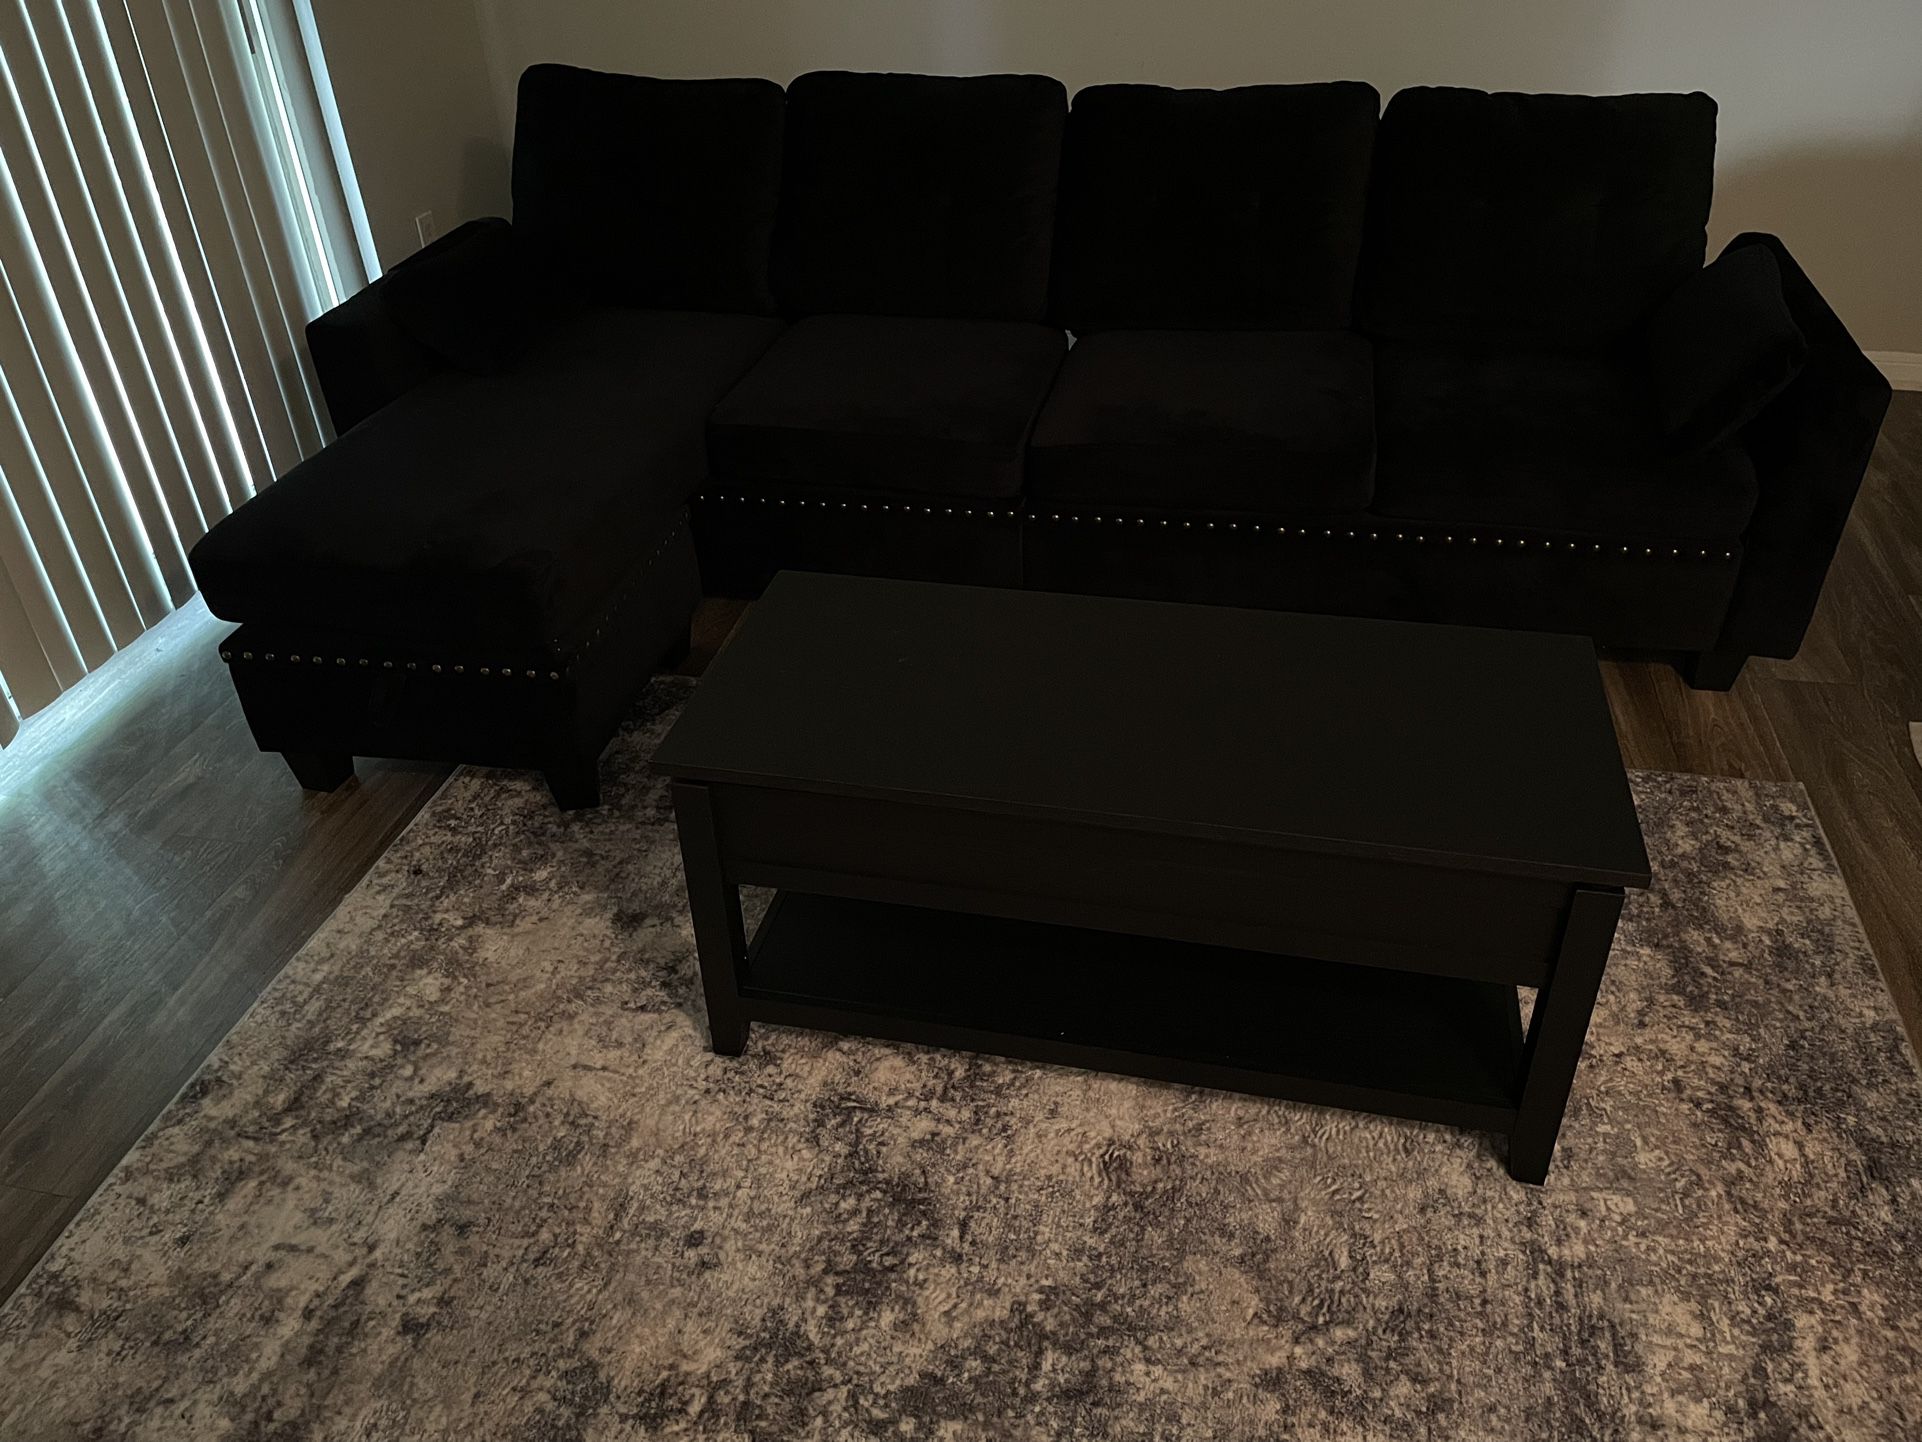 Couch, Table, & Rug 